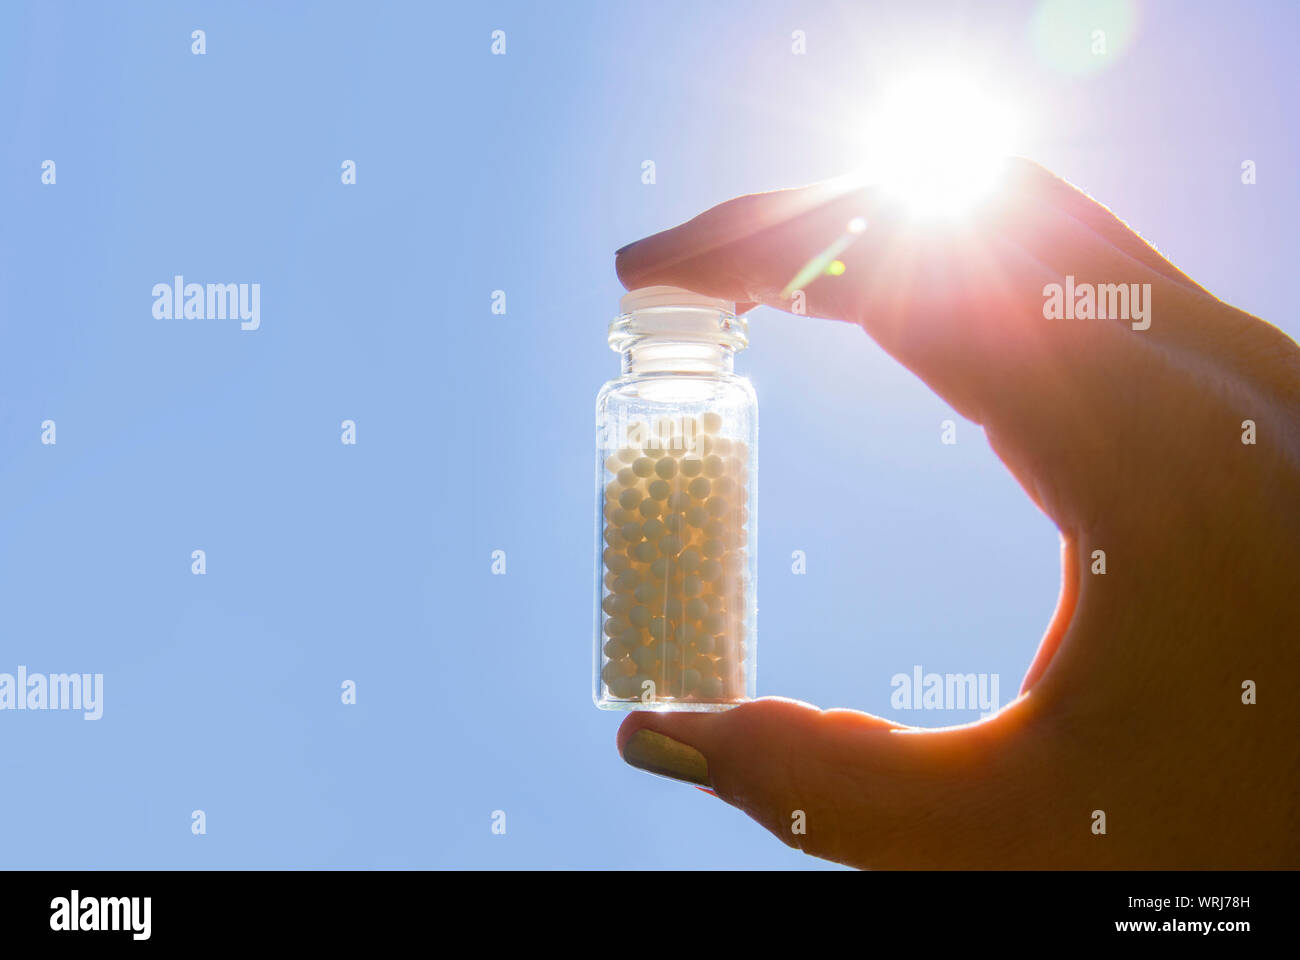 Selective focus on person hand holding glass jar full of small white round homeopathy pills against blue sky background. Stock Photo